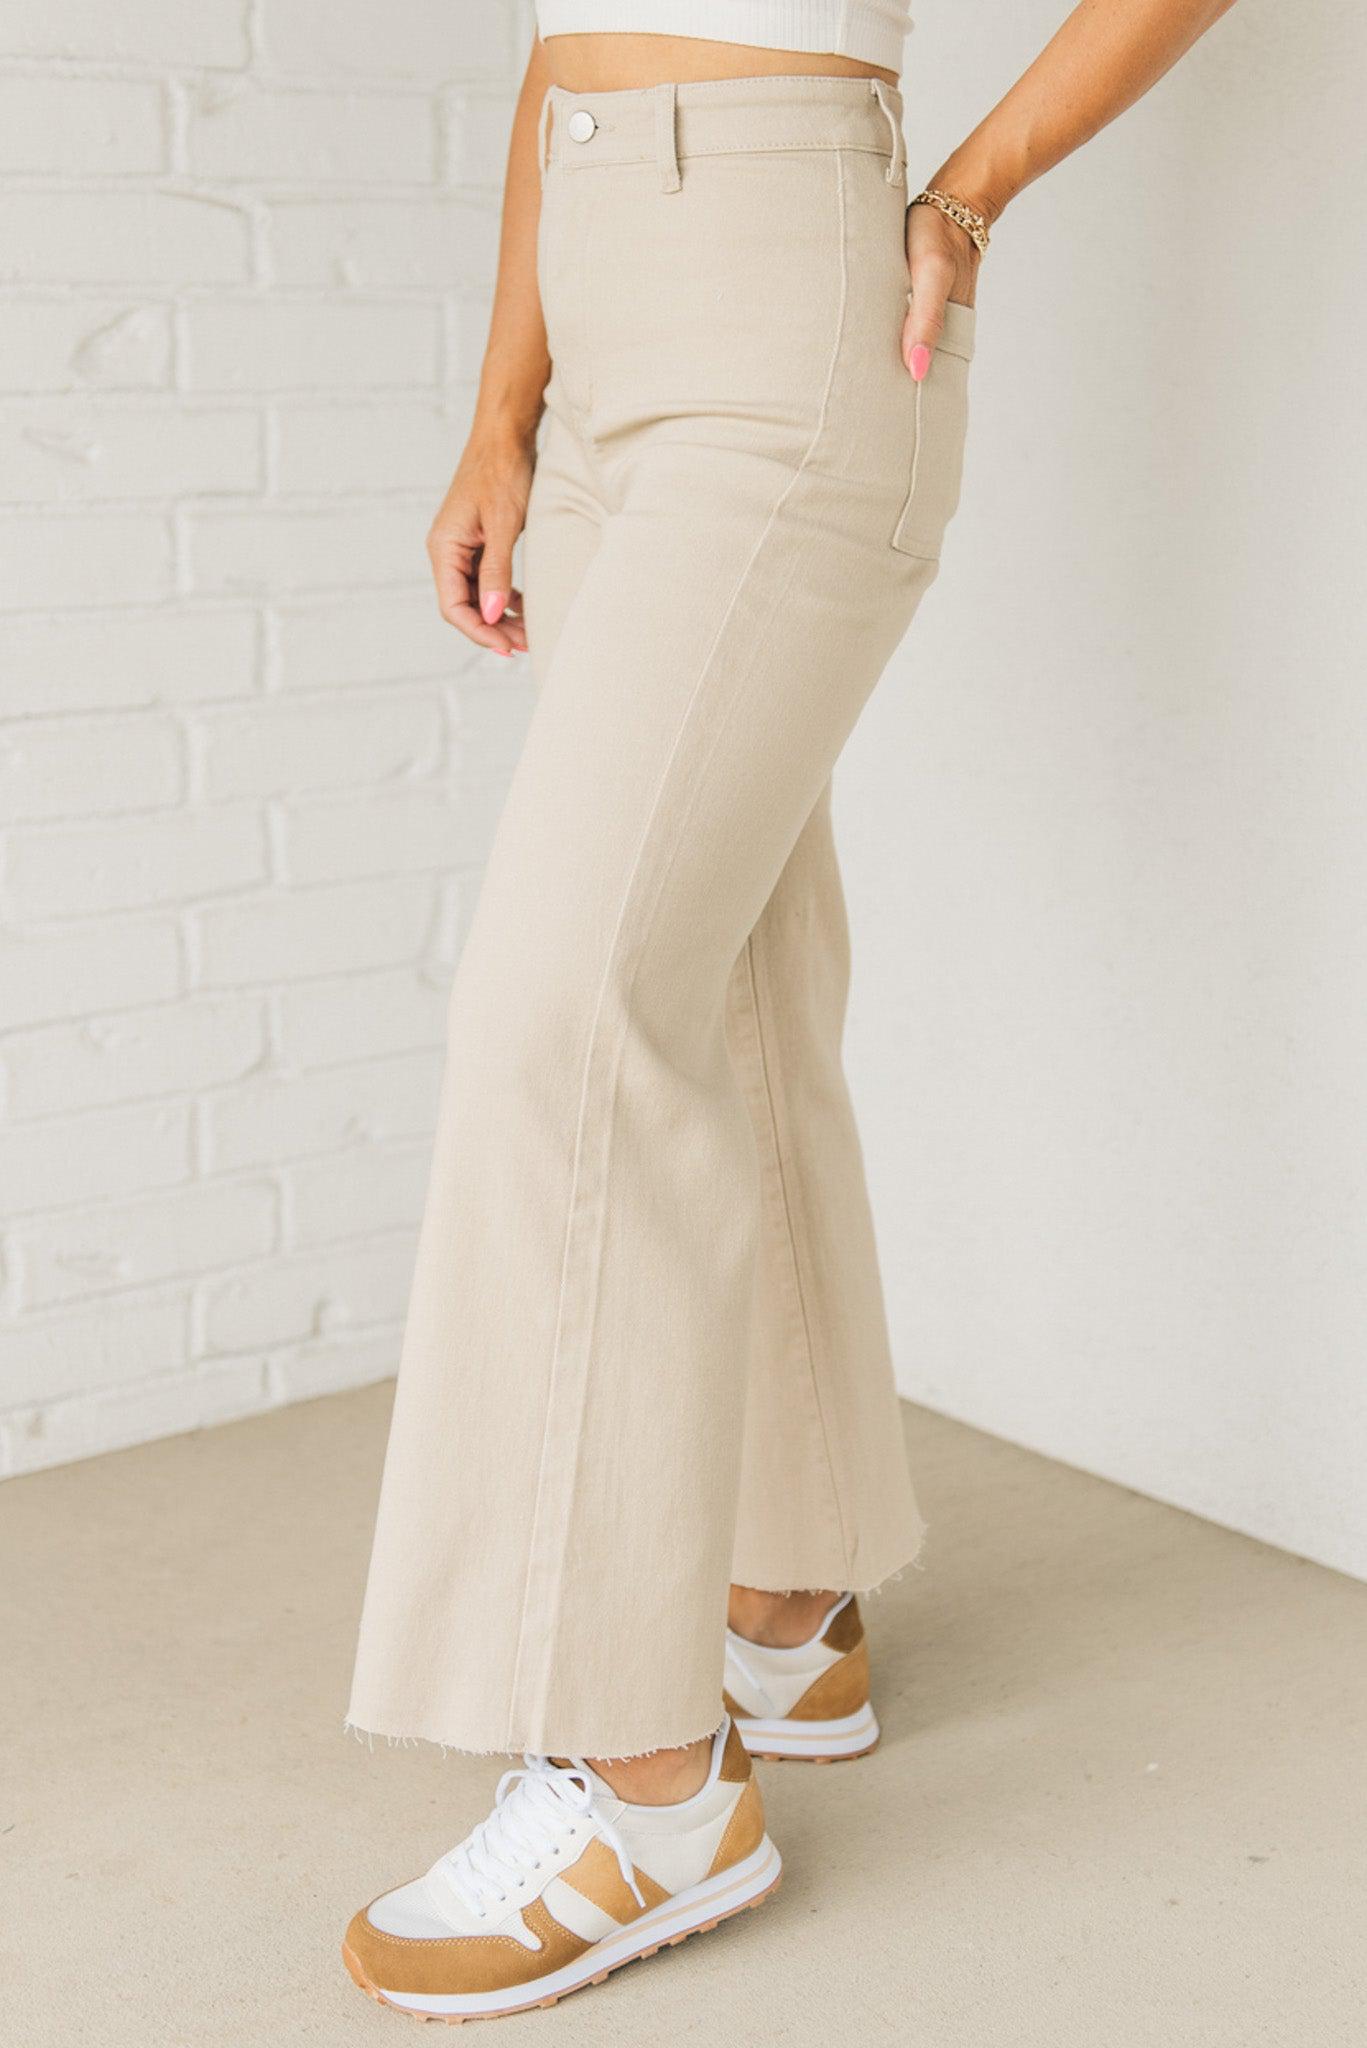 Express High Waisted Cream Wide Leg Palazzo Gold Button Jeans